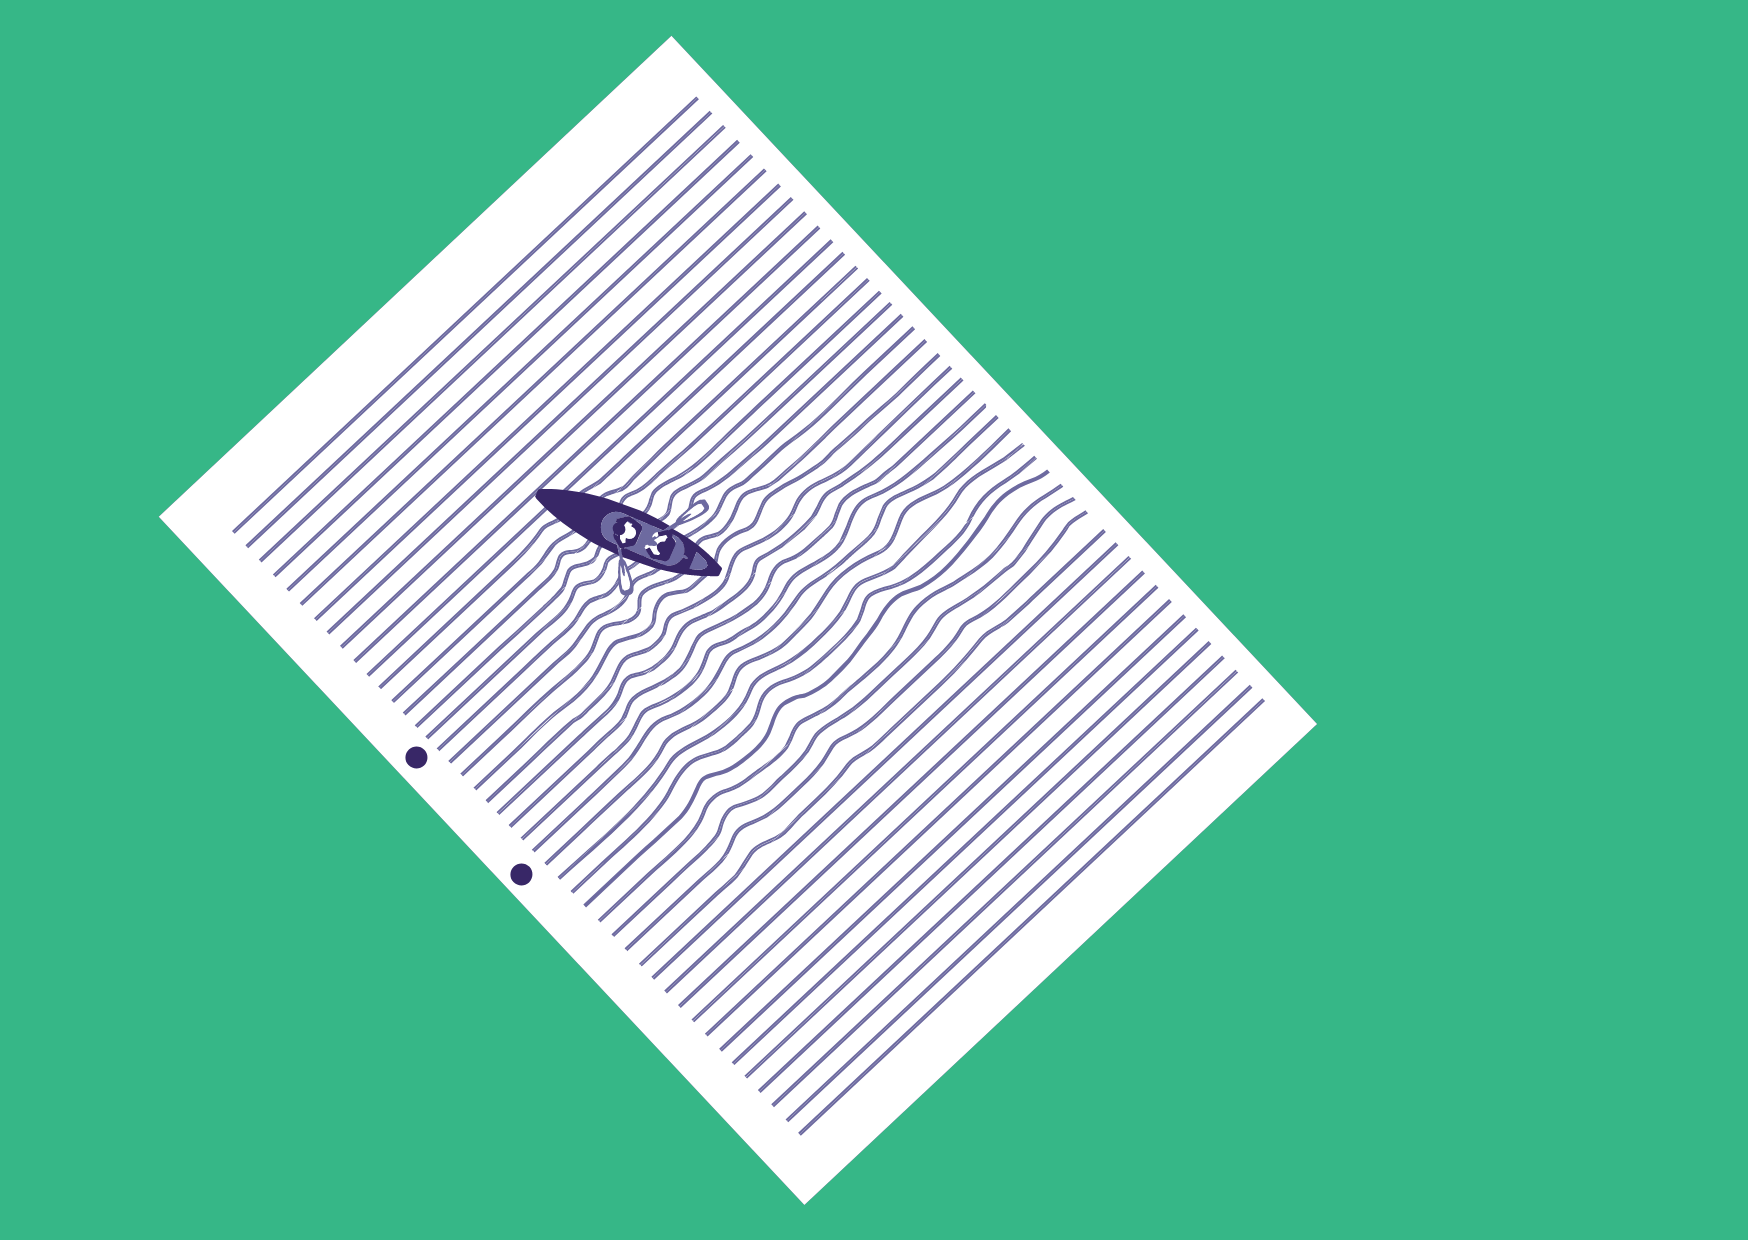 A vector image of someone in a boat sailing across a piece of paper